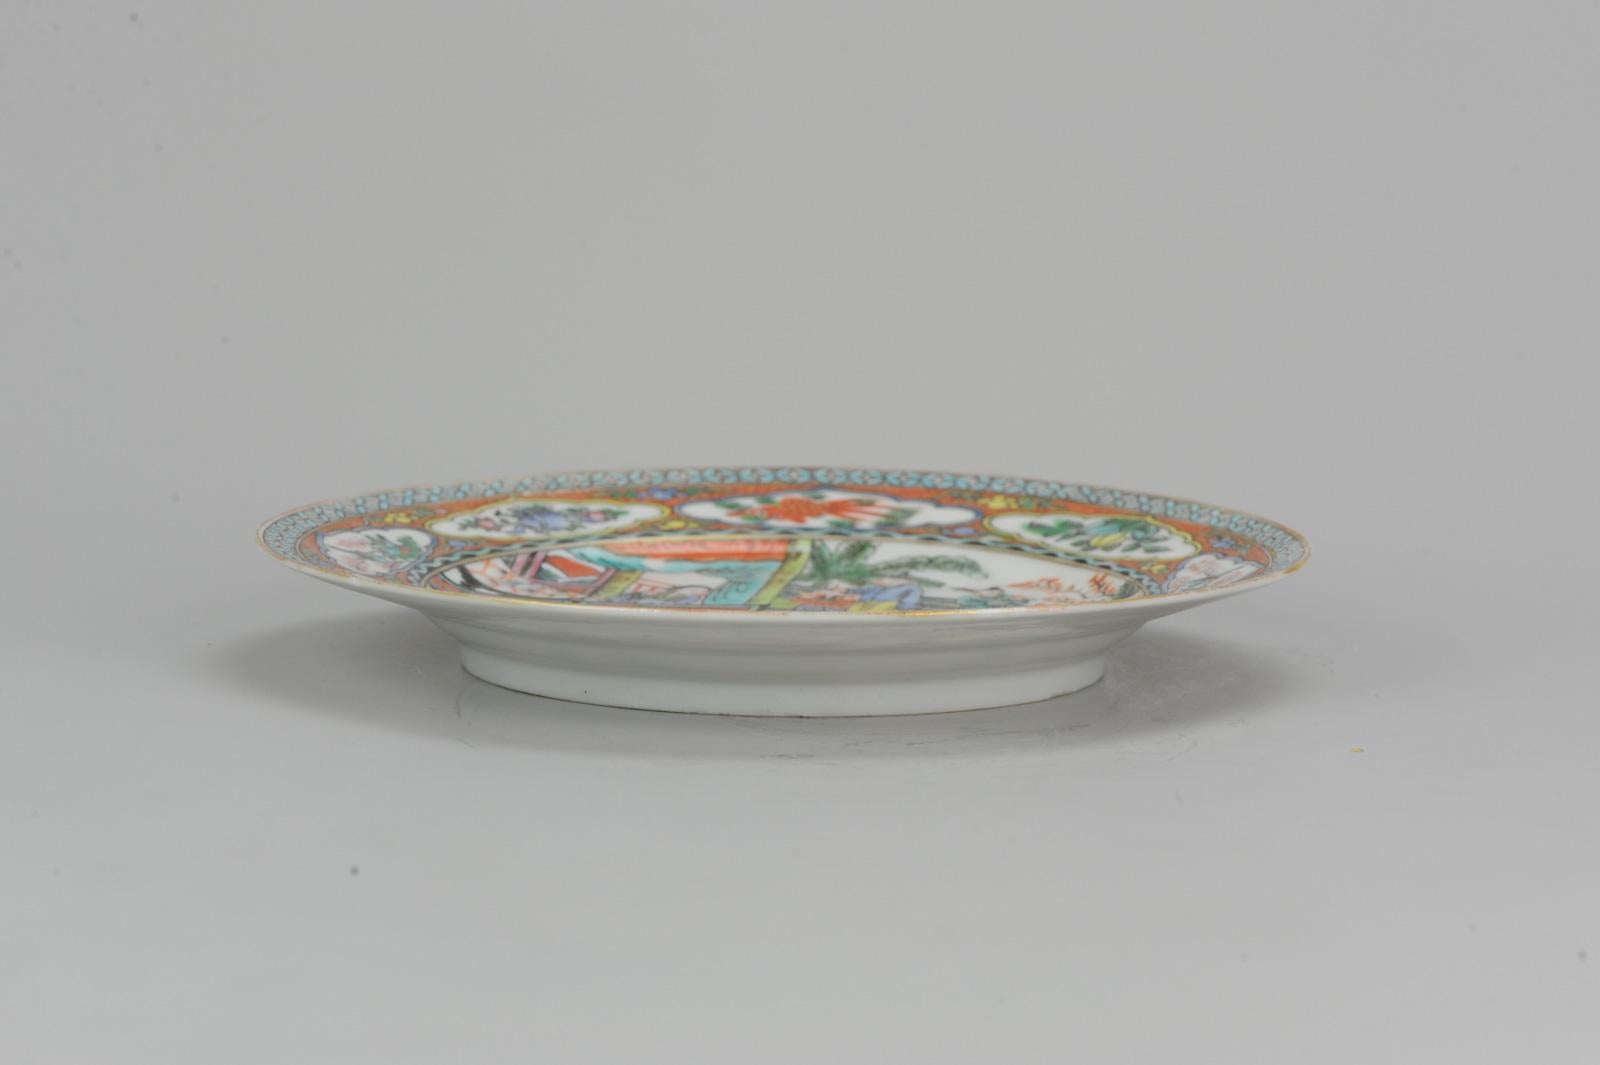 Antique Chinese Porcelain Cantonese Palace Plate Chinese, 19th/Early 20th Cen In Good Condition For Sale In Amsterdam, Noord Holland